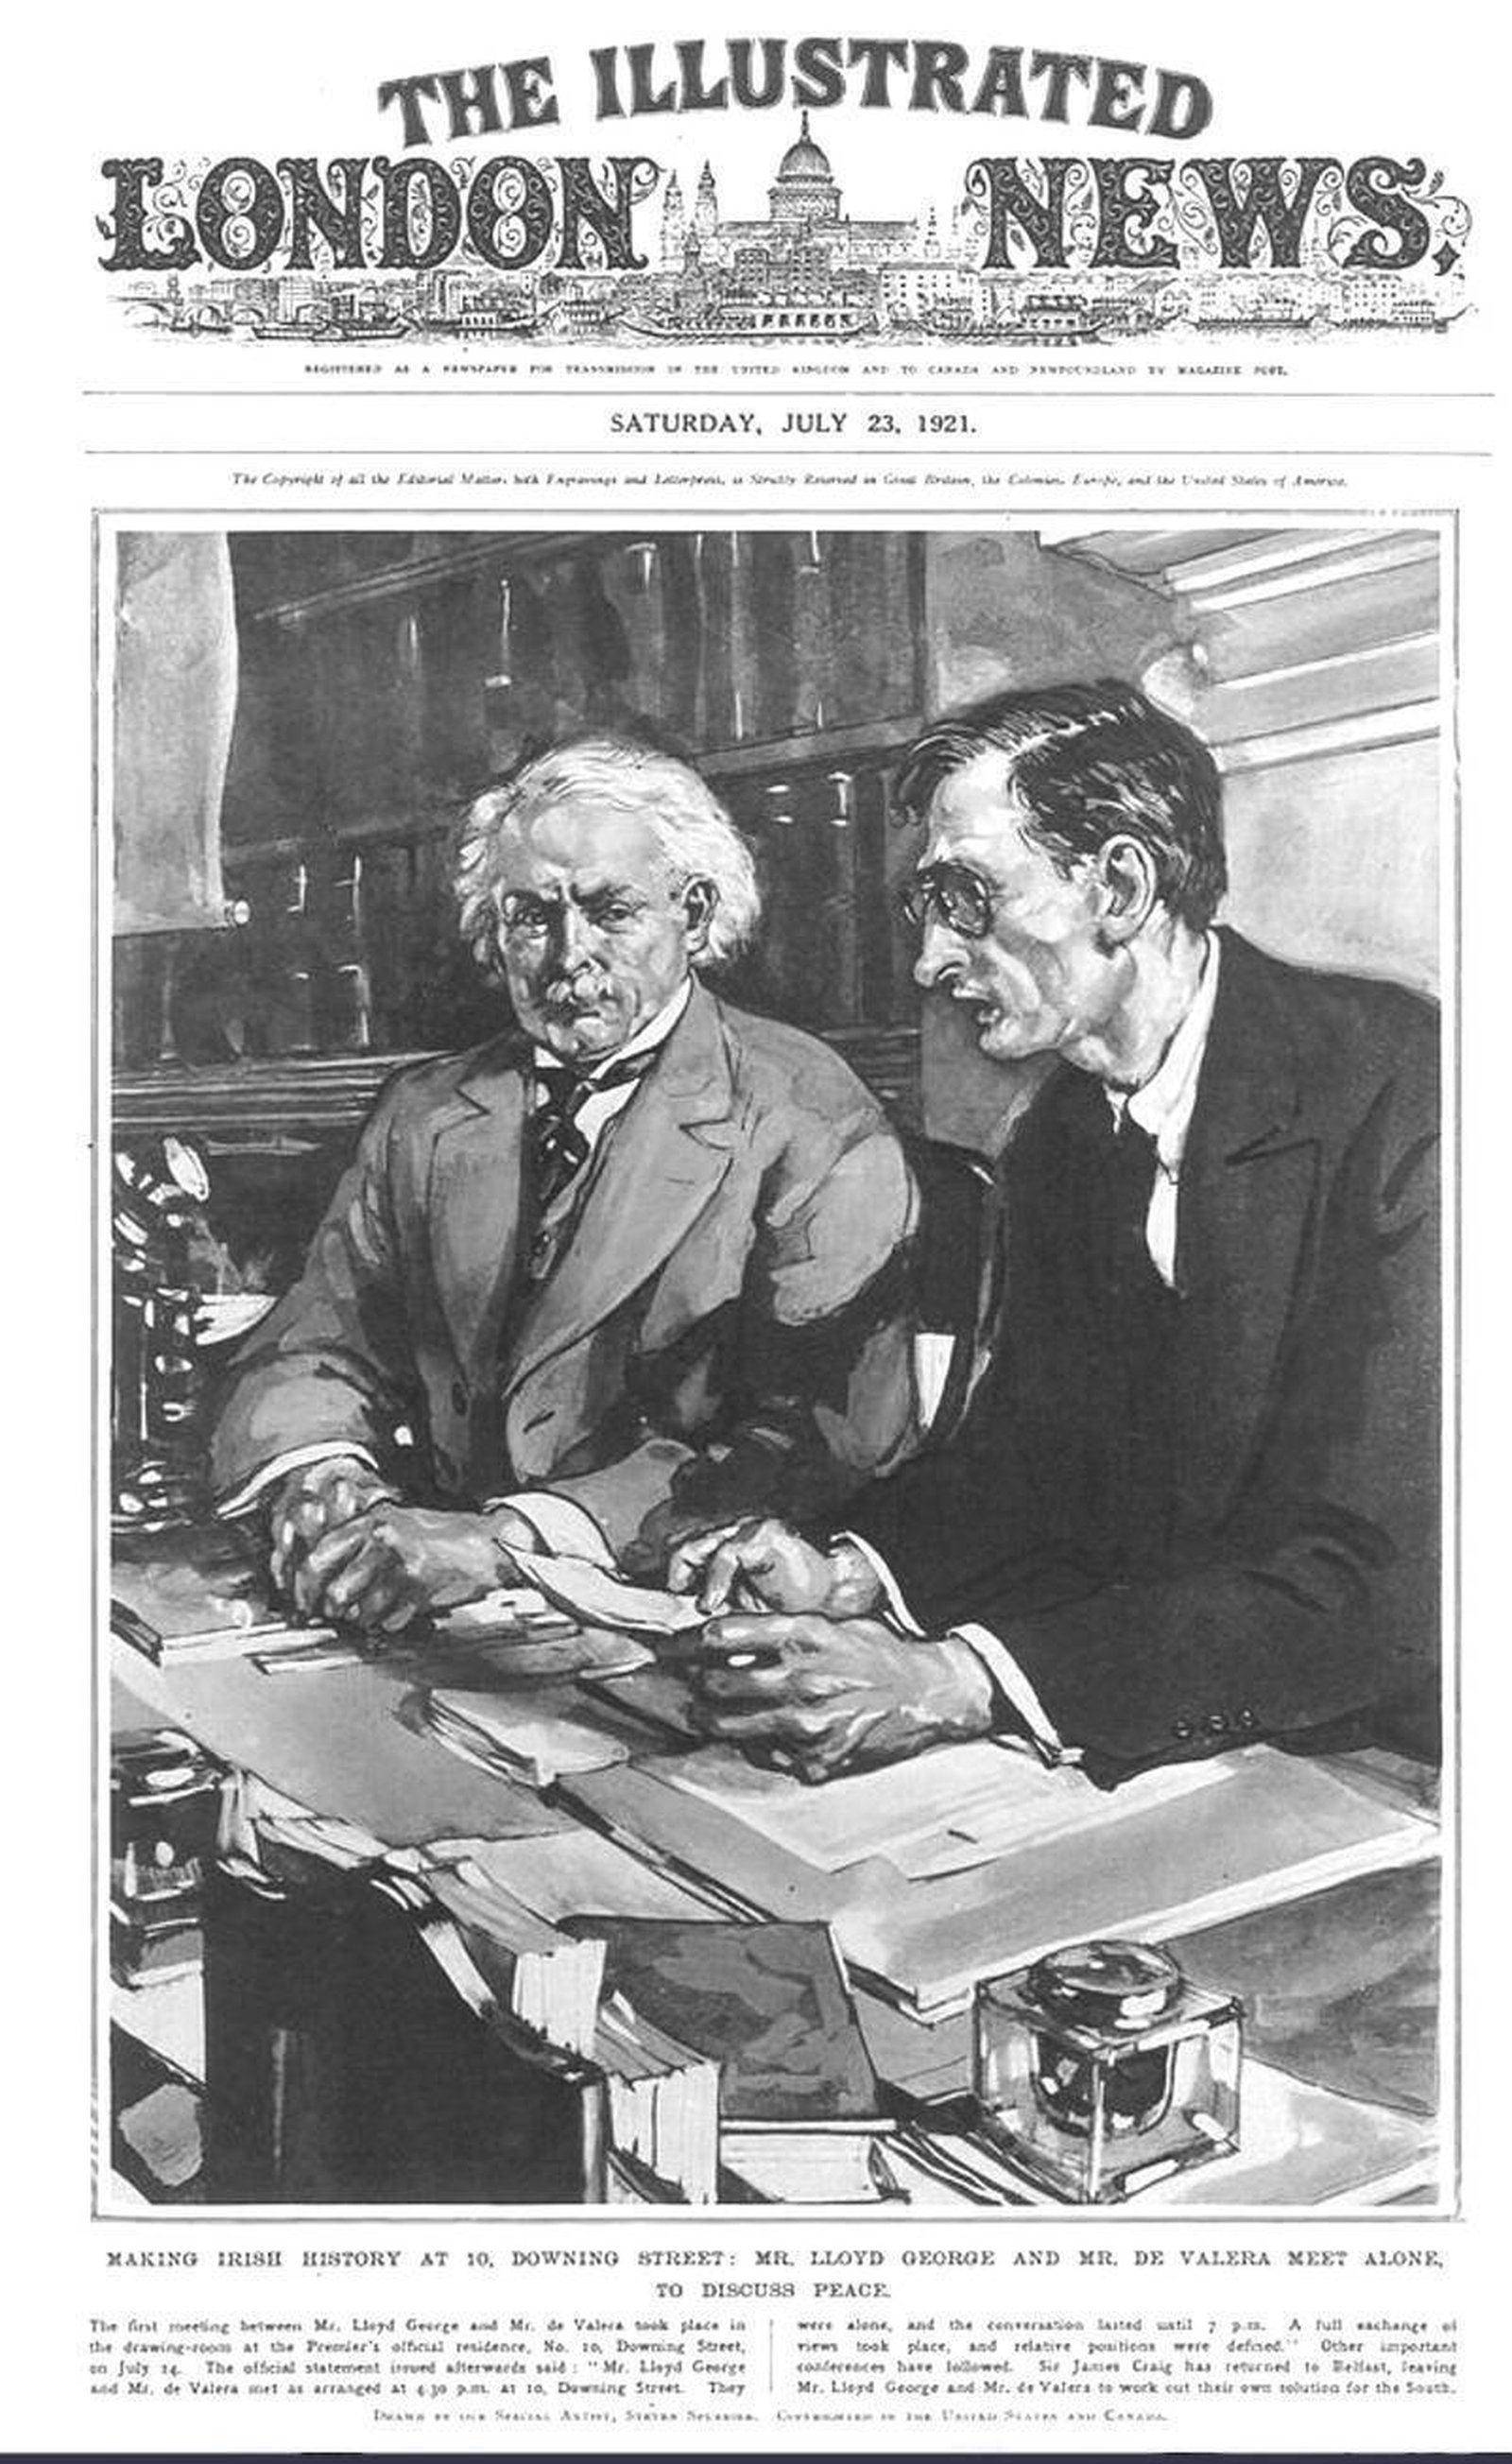 Image - Face to Face at last. The Illustrated London News front page illustration of the first meeting in Downing Street, of Eamon de Valera and David Lloyd George. (Credit: Alamy images)